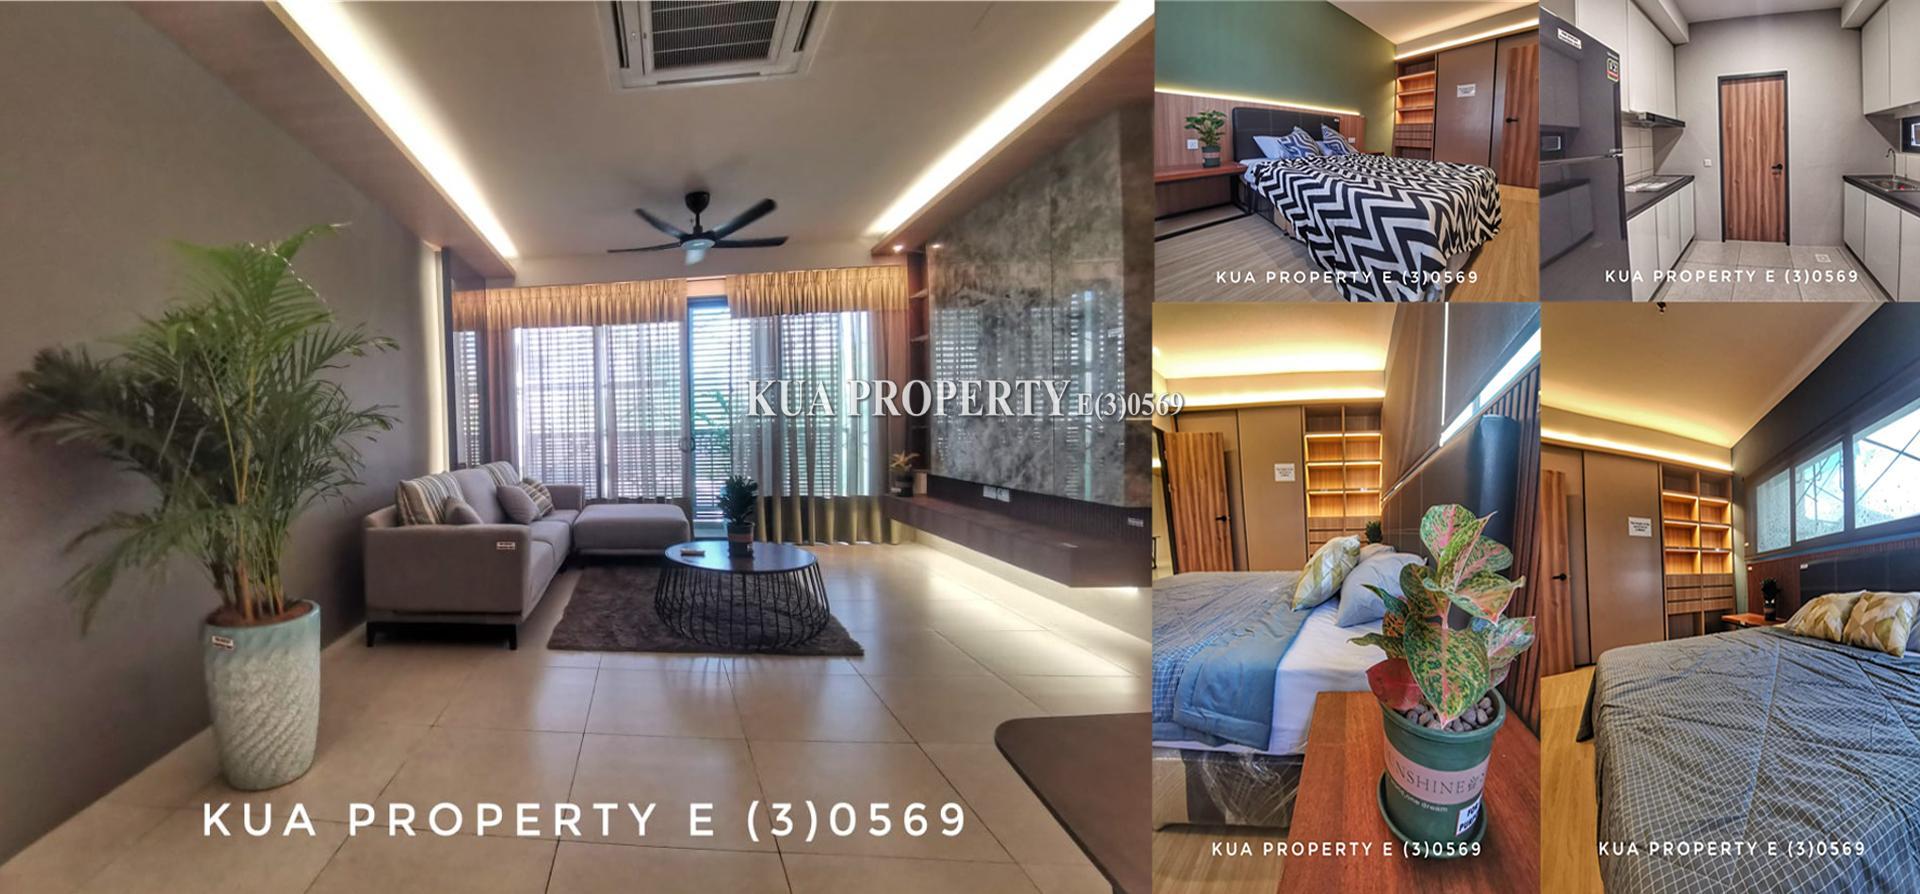 Doncaster Residence Apartment For Sale! Located at Hup Kee, near Boulevard